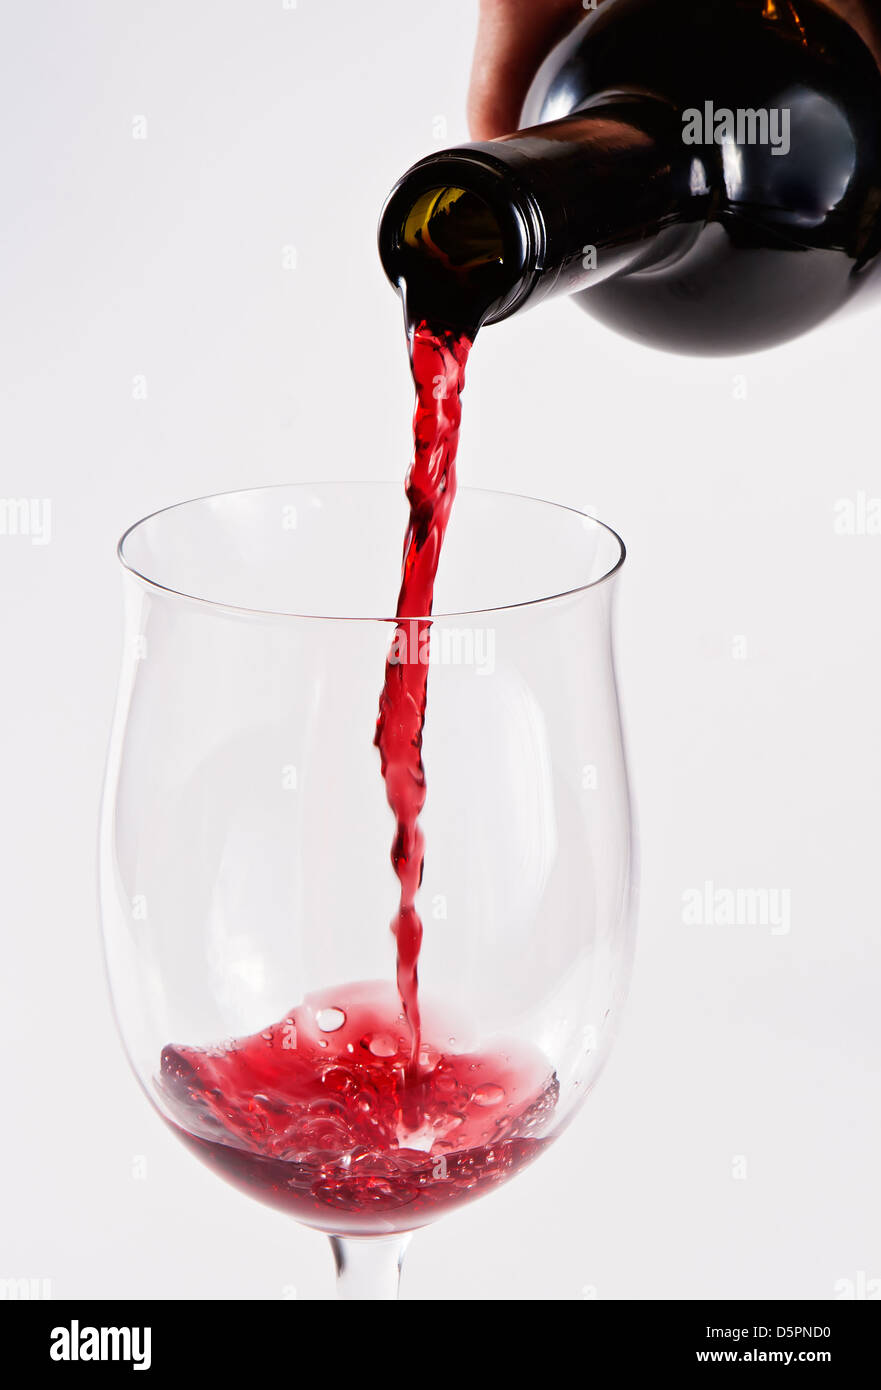 Pouring in a glass dry red wine Stock Photo